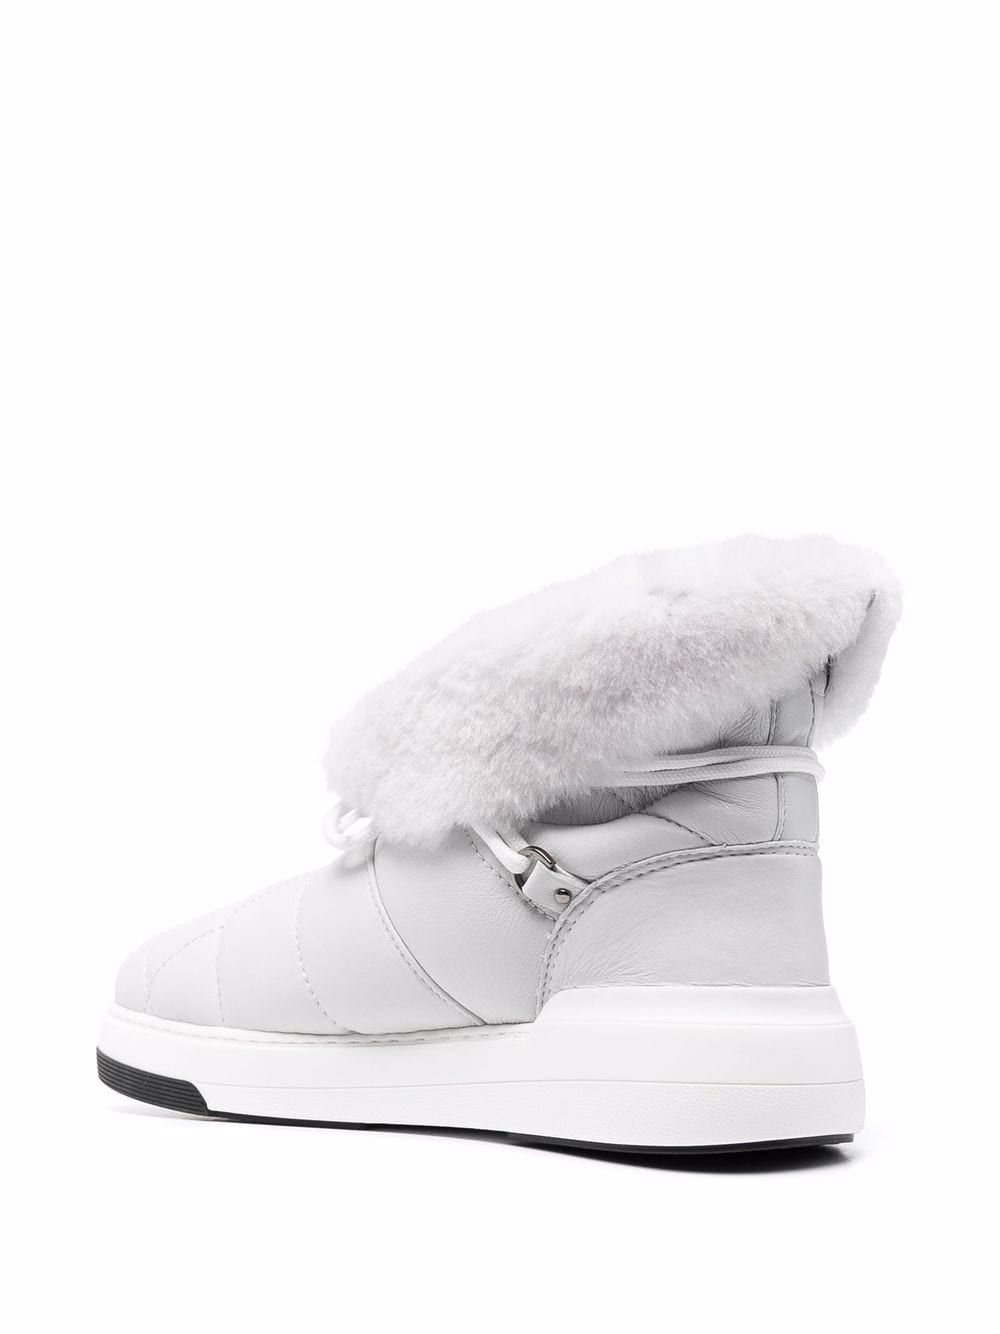 Keep Yourself Warm  In Cold Winters With Shearling Boots